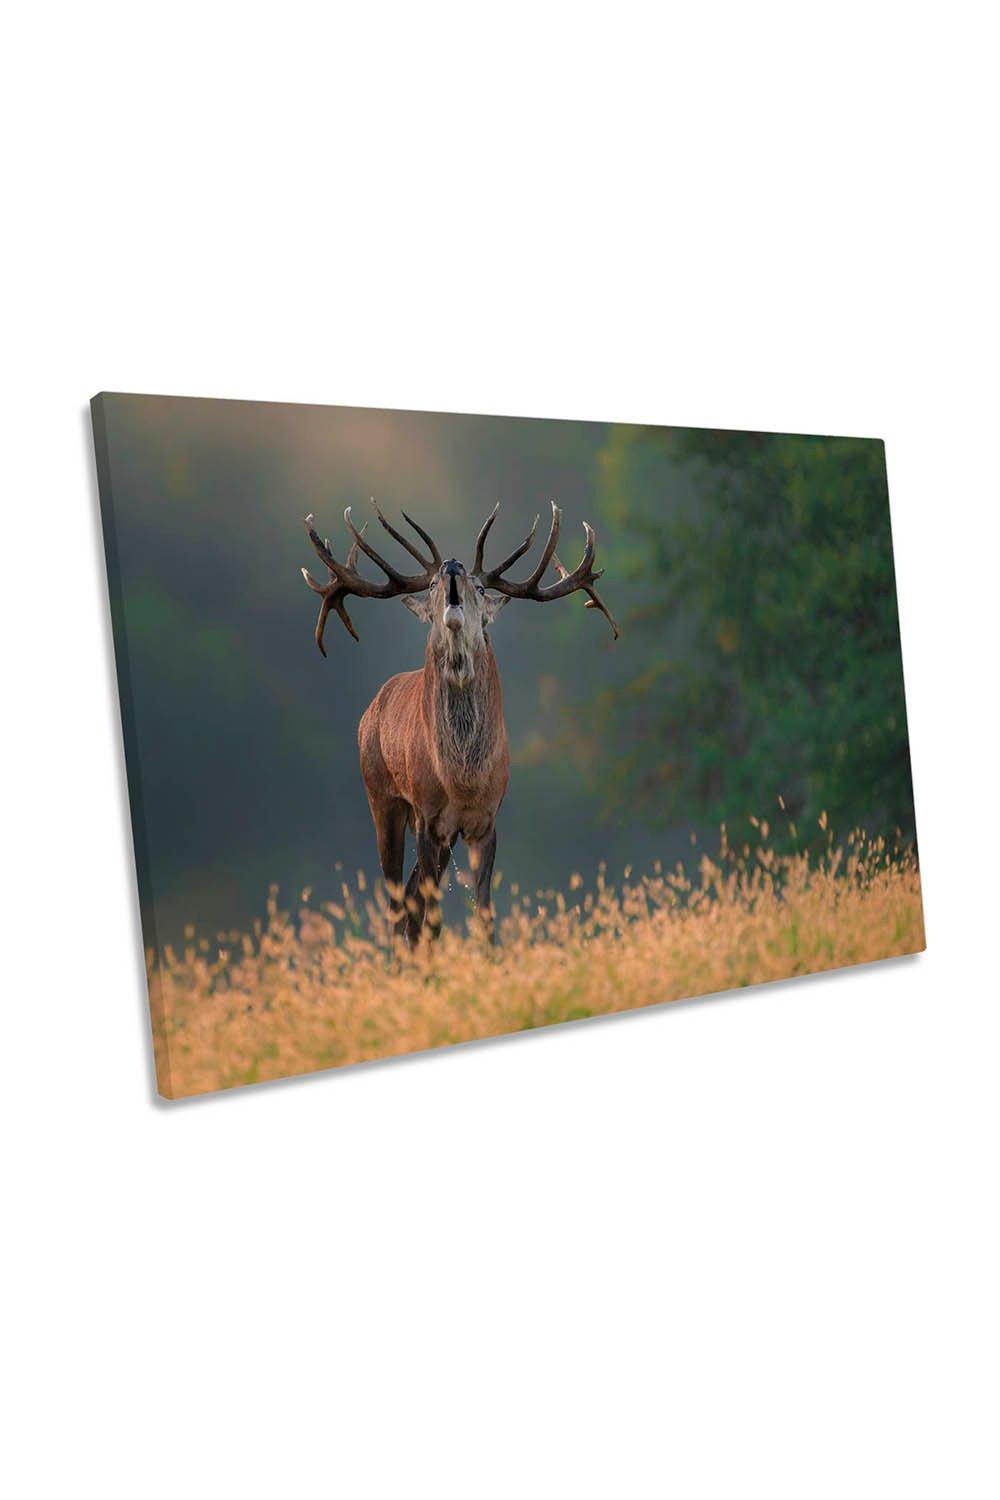 Stag Wedding Song Deer Wildlife Canvas Wall Art Picture Print